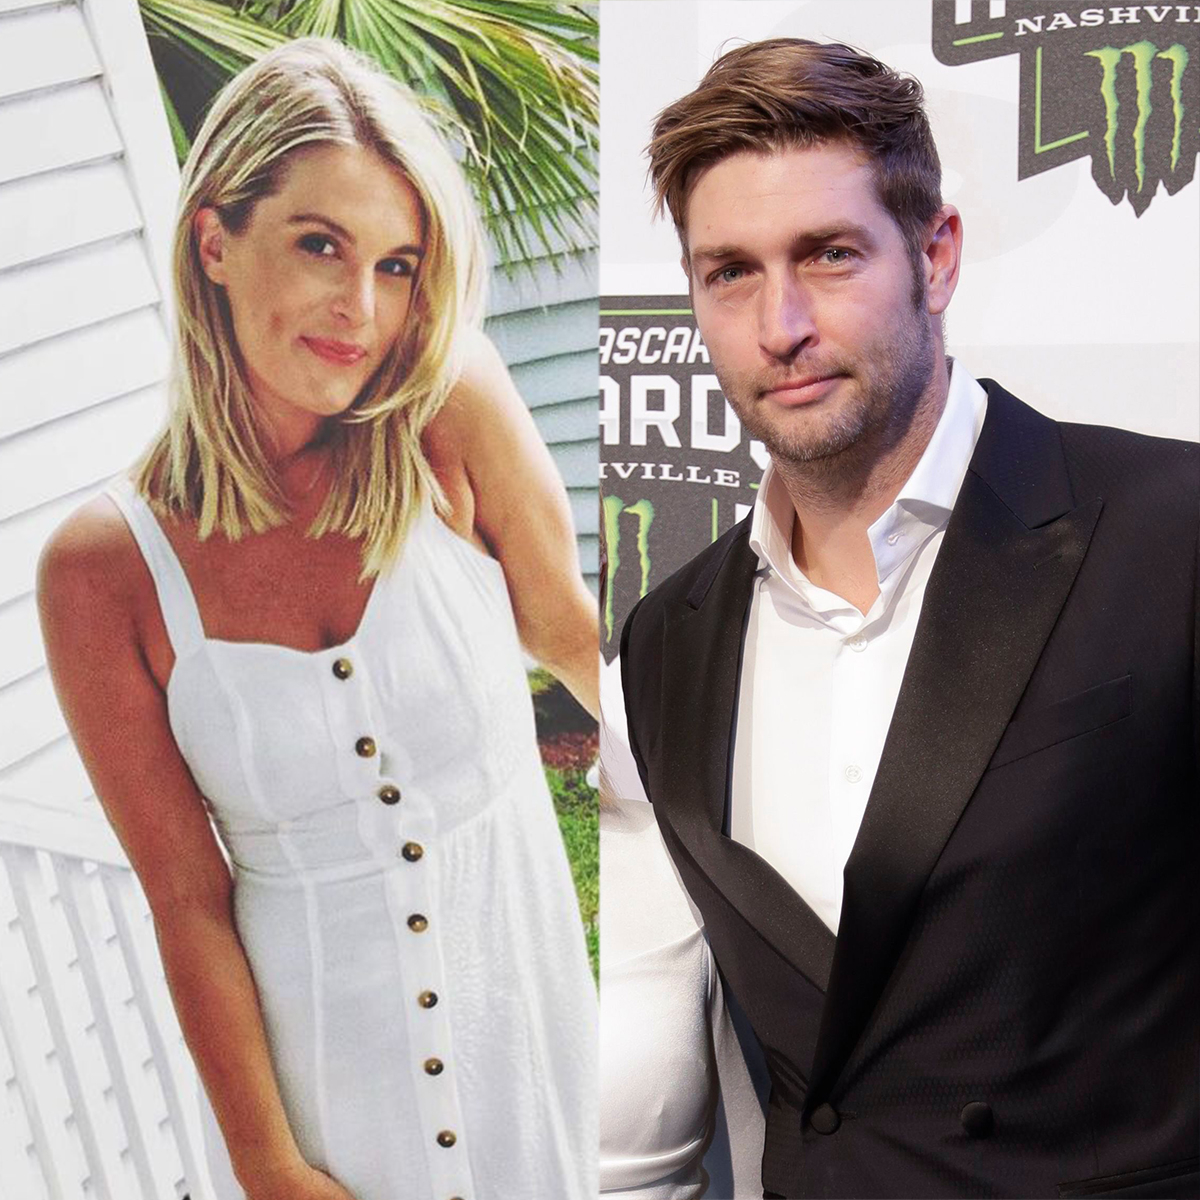 Southern Charm’s Madison LeCroy publishes Jay Cutler’s “Receipts”